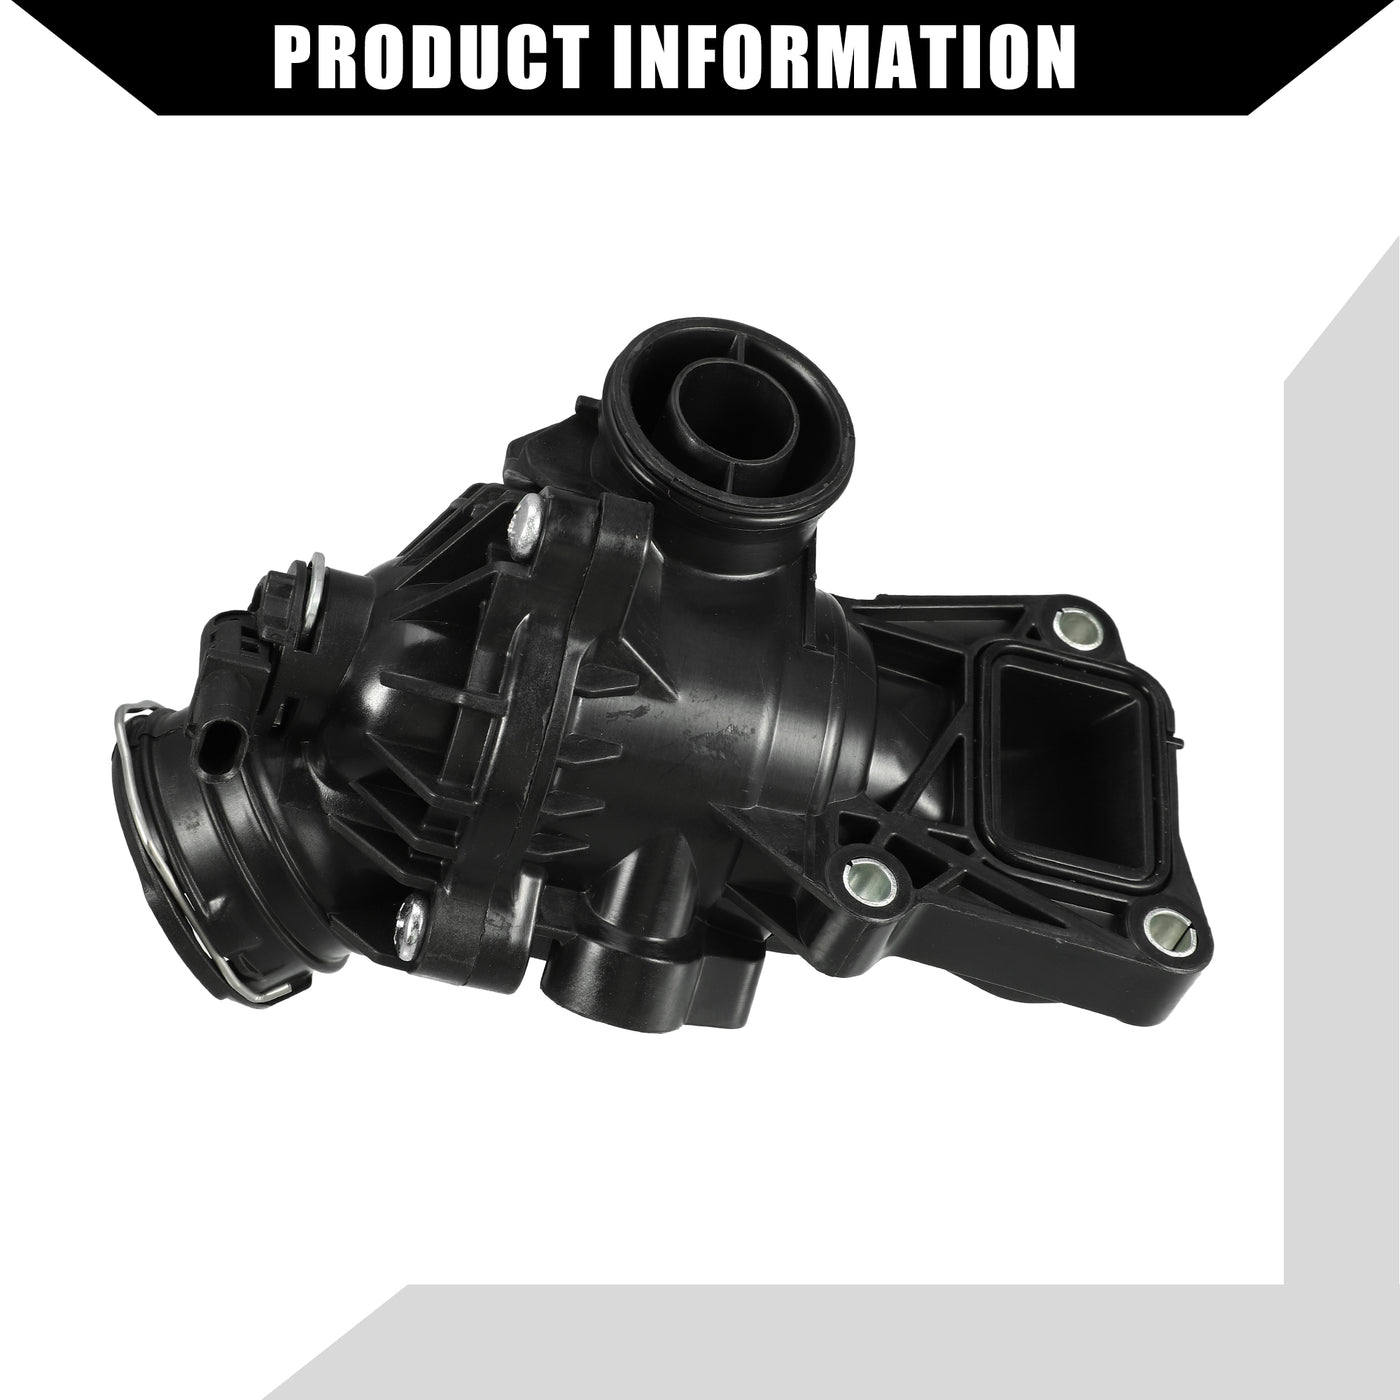 Hihaha No.A2762000515 Engine Coolant Thermostat Housing Assembly for Mercedes-Benz ML350 2012-2015 for Mercedes-Benz E350 2012 / Inner Water Pump Thermostat / Durable Plastic / 1Pcs Black